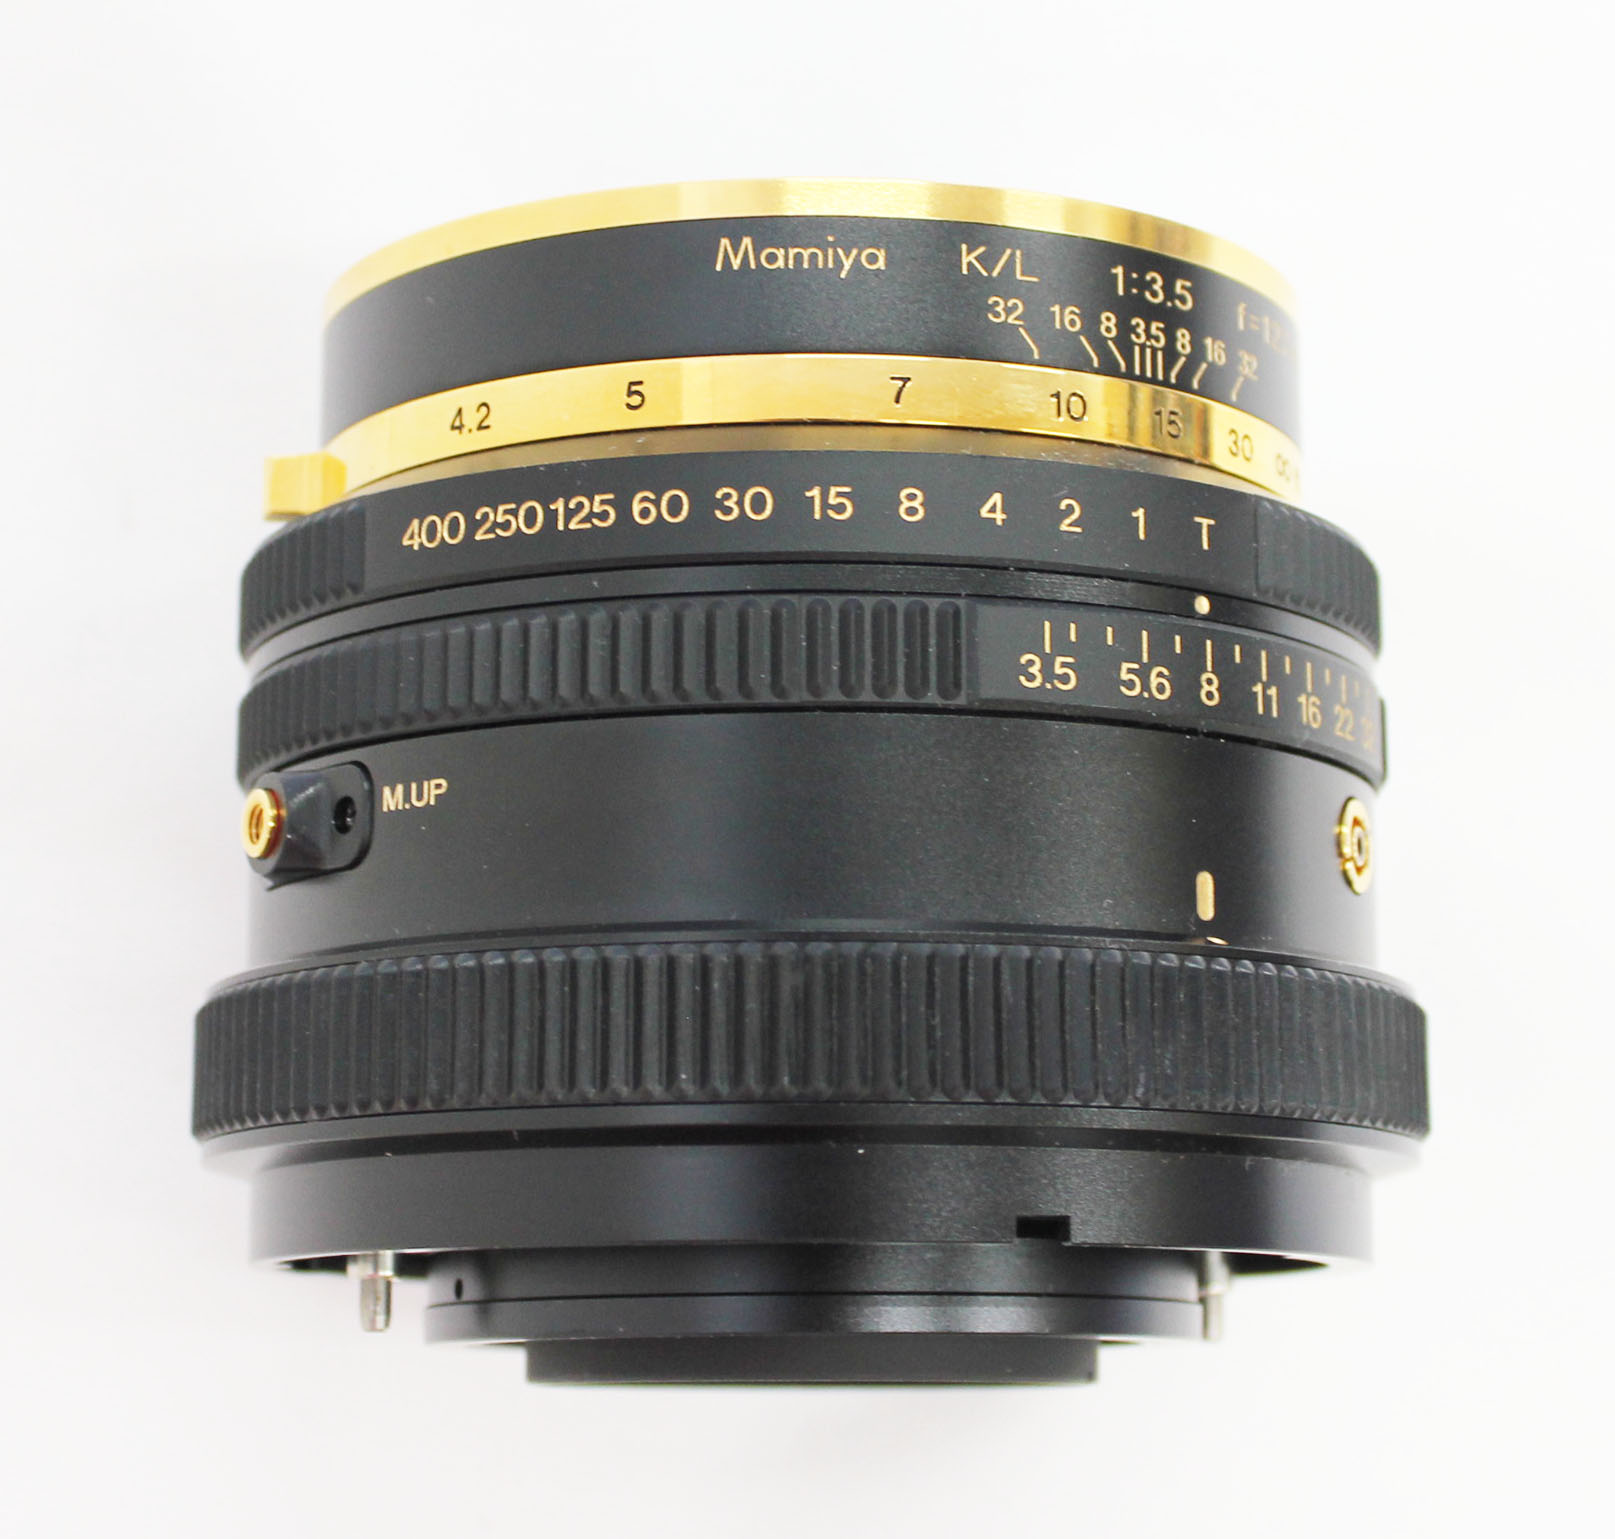 Mamiya RB67 Pro SD Gold K/L 127mm F/3.5 50 Years Limited Edition